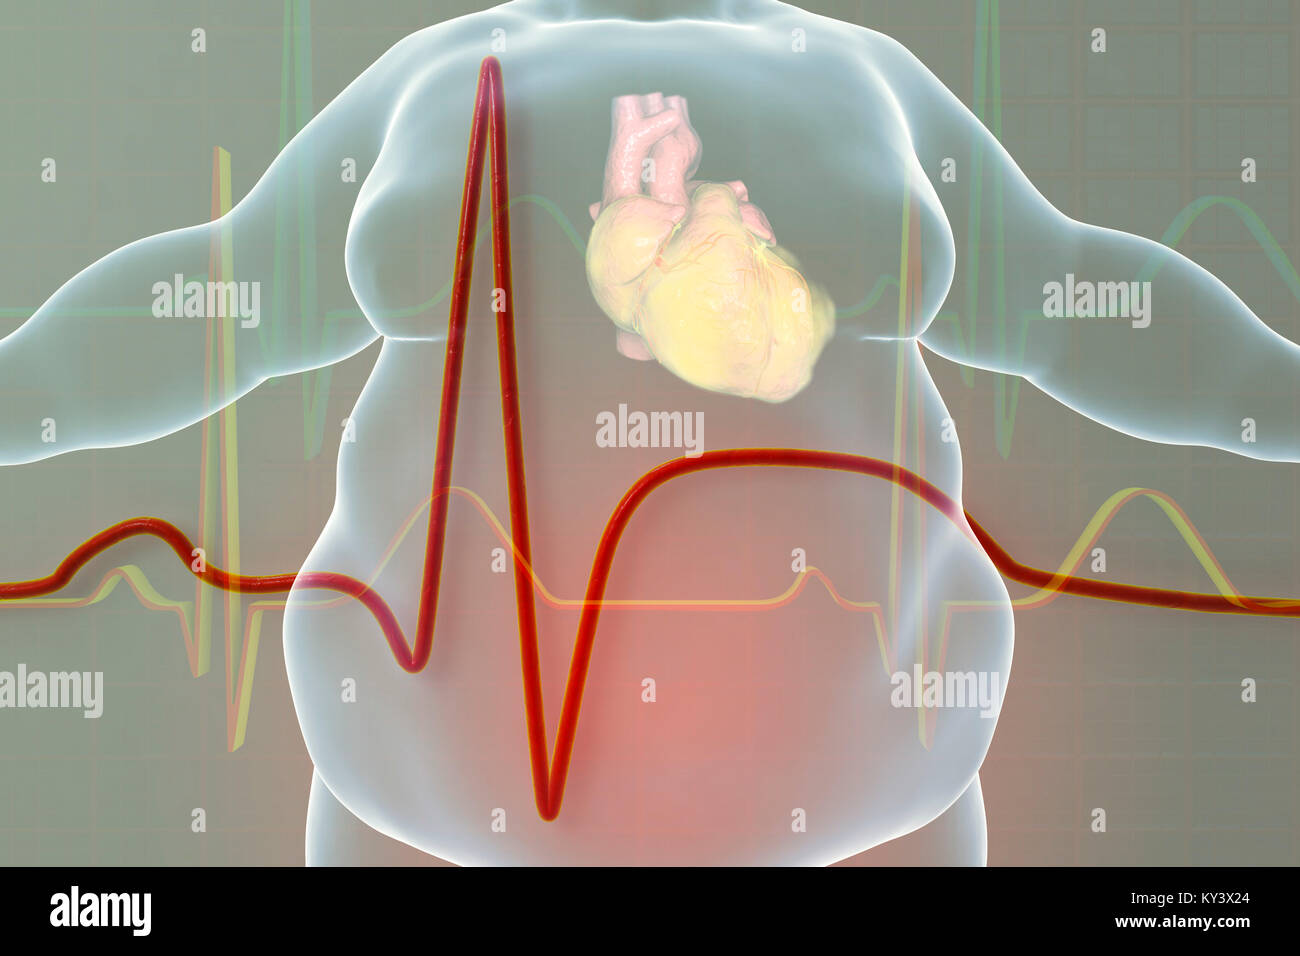 Heart attack in obese man. Conceptual illustration showing a fatty heart in an overweight man and an electrocardiogram with signs of myocardial infarction (heart attack). Stock Photo